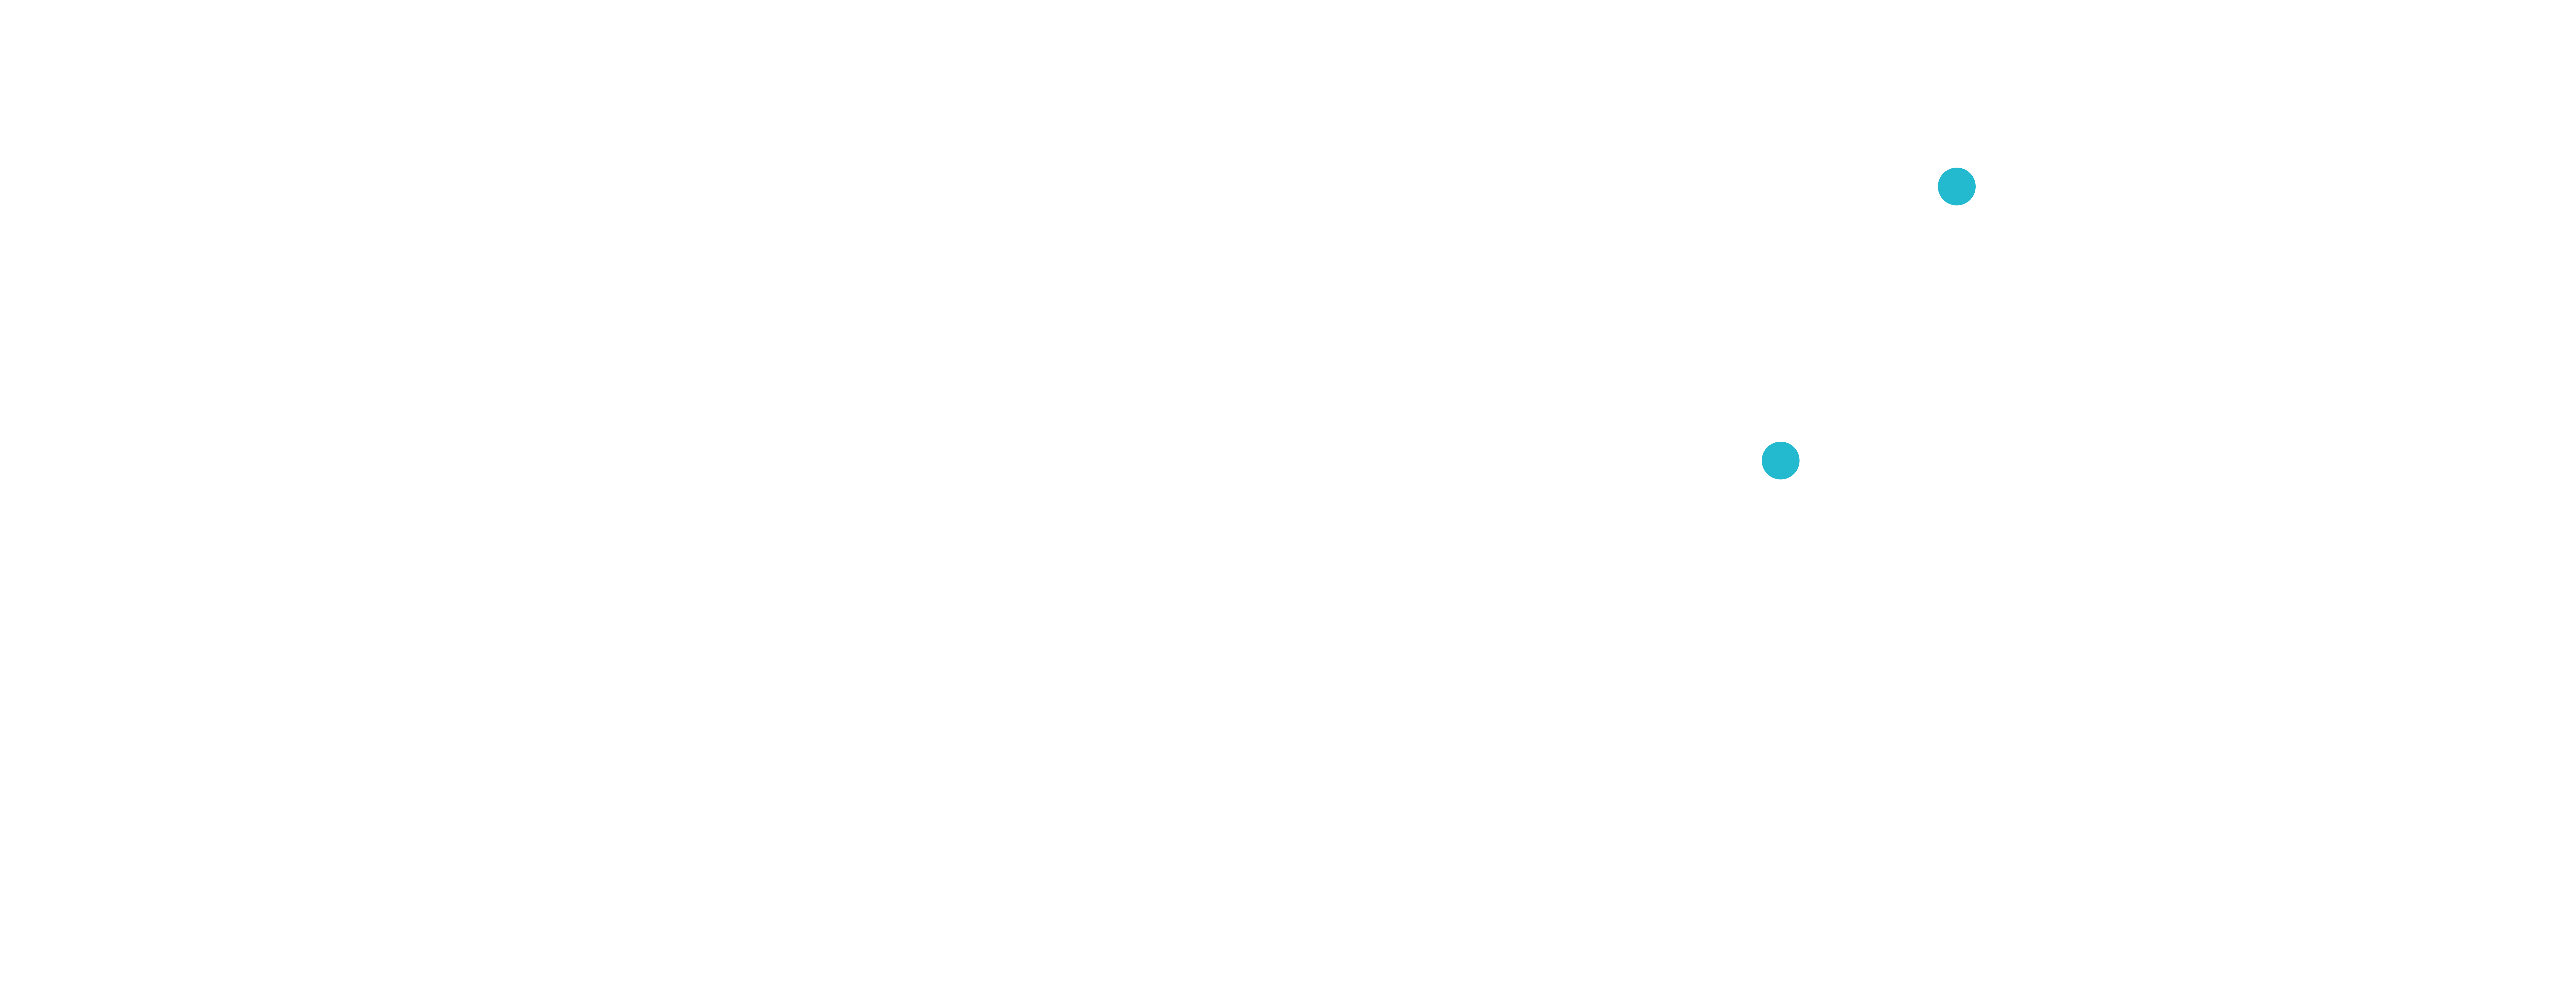 Hypnose Factory